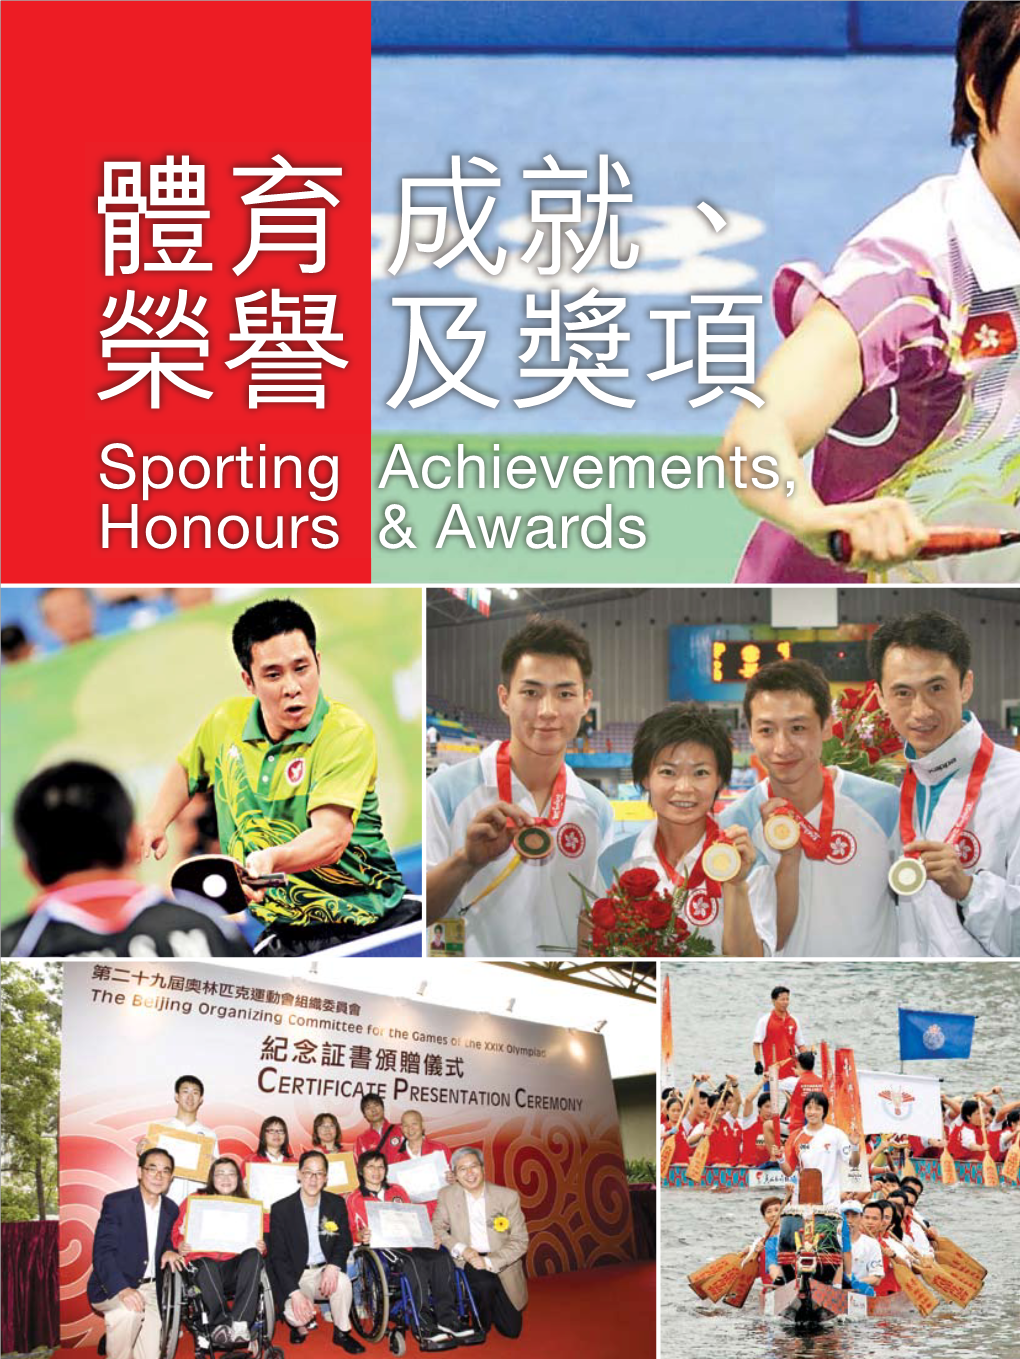 Sporting Achievements, Honours & Awards